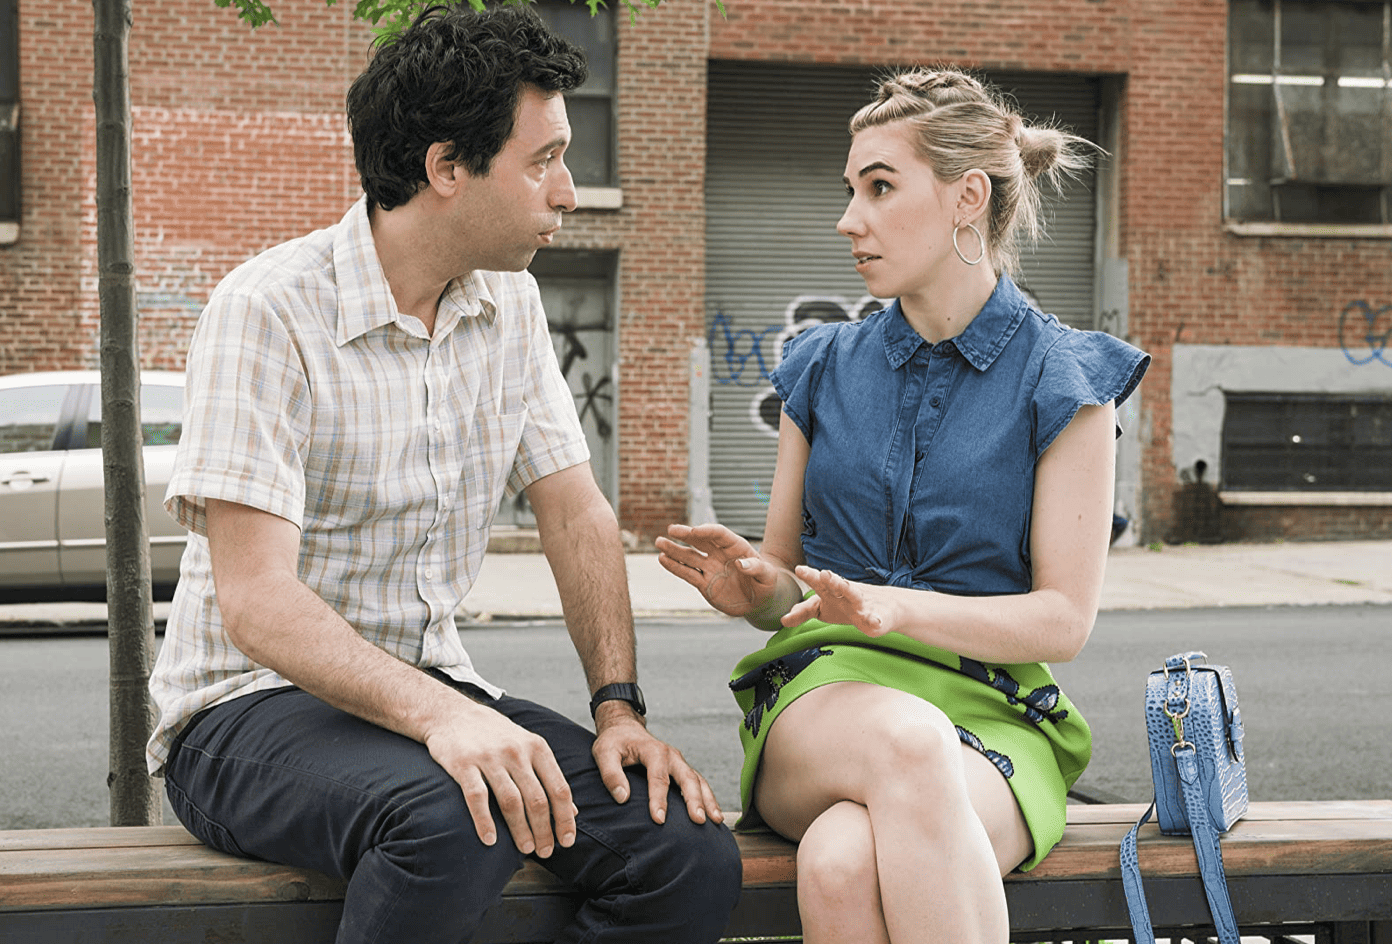 Shoshanna having what looks like a tense conversation with her boyfriend Ray in this image from Apatow Productions